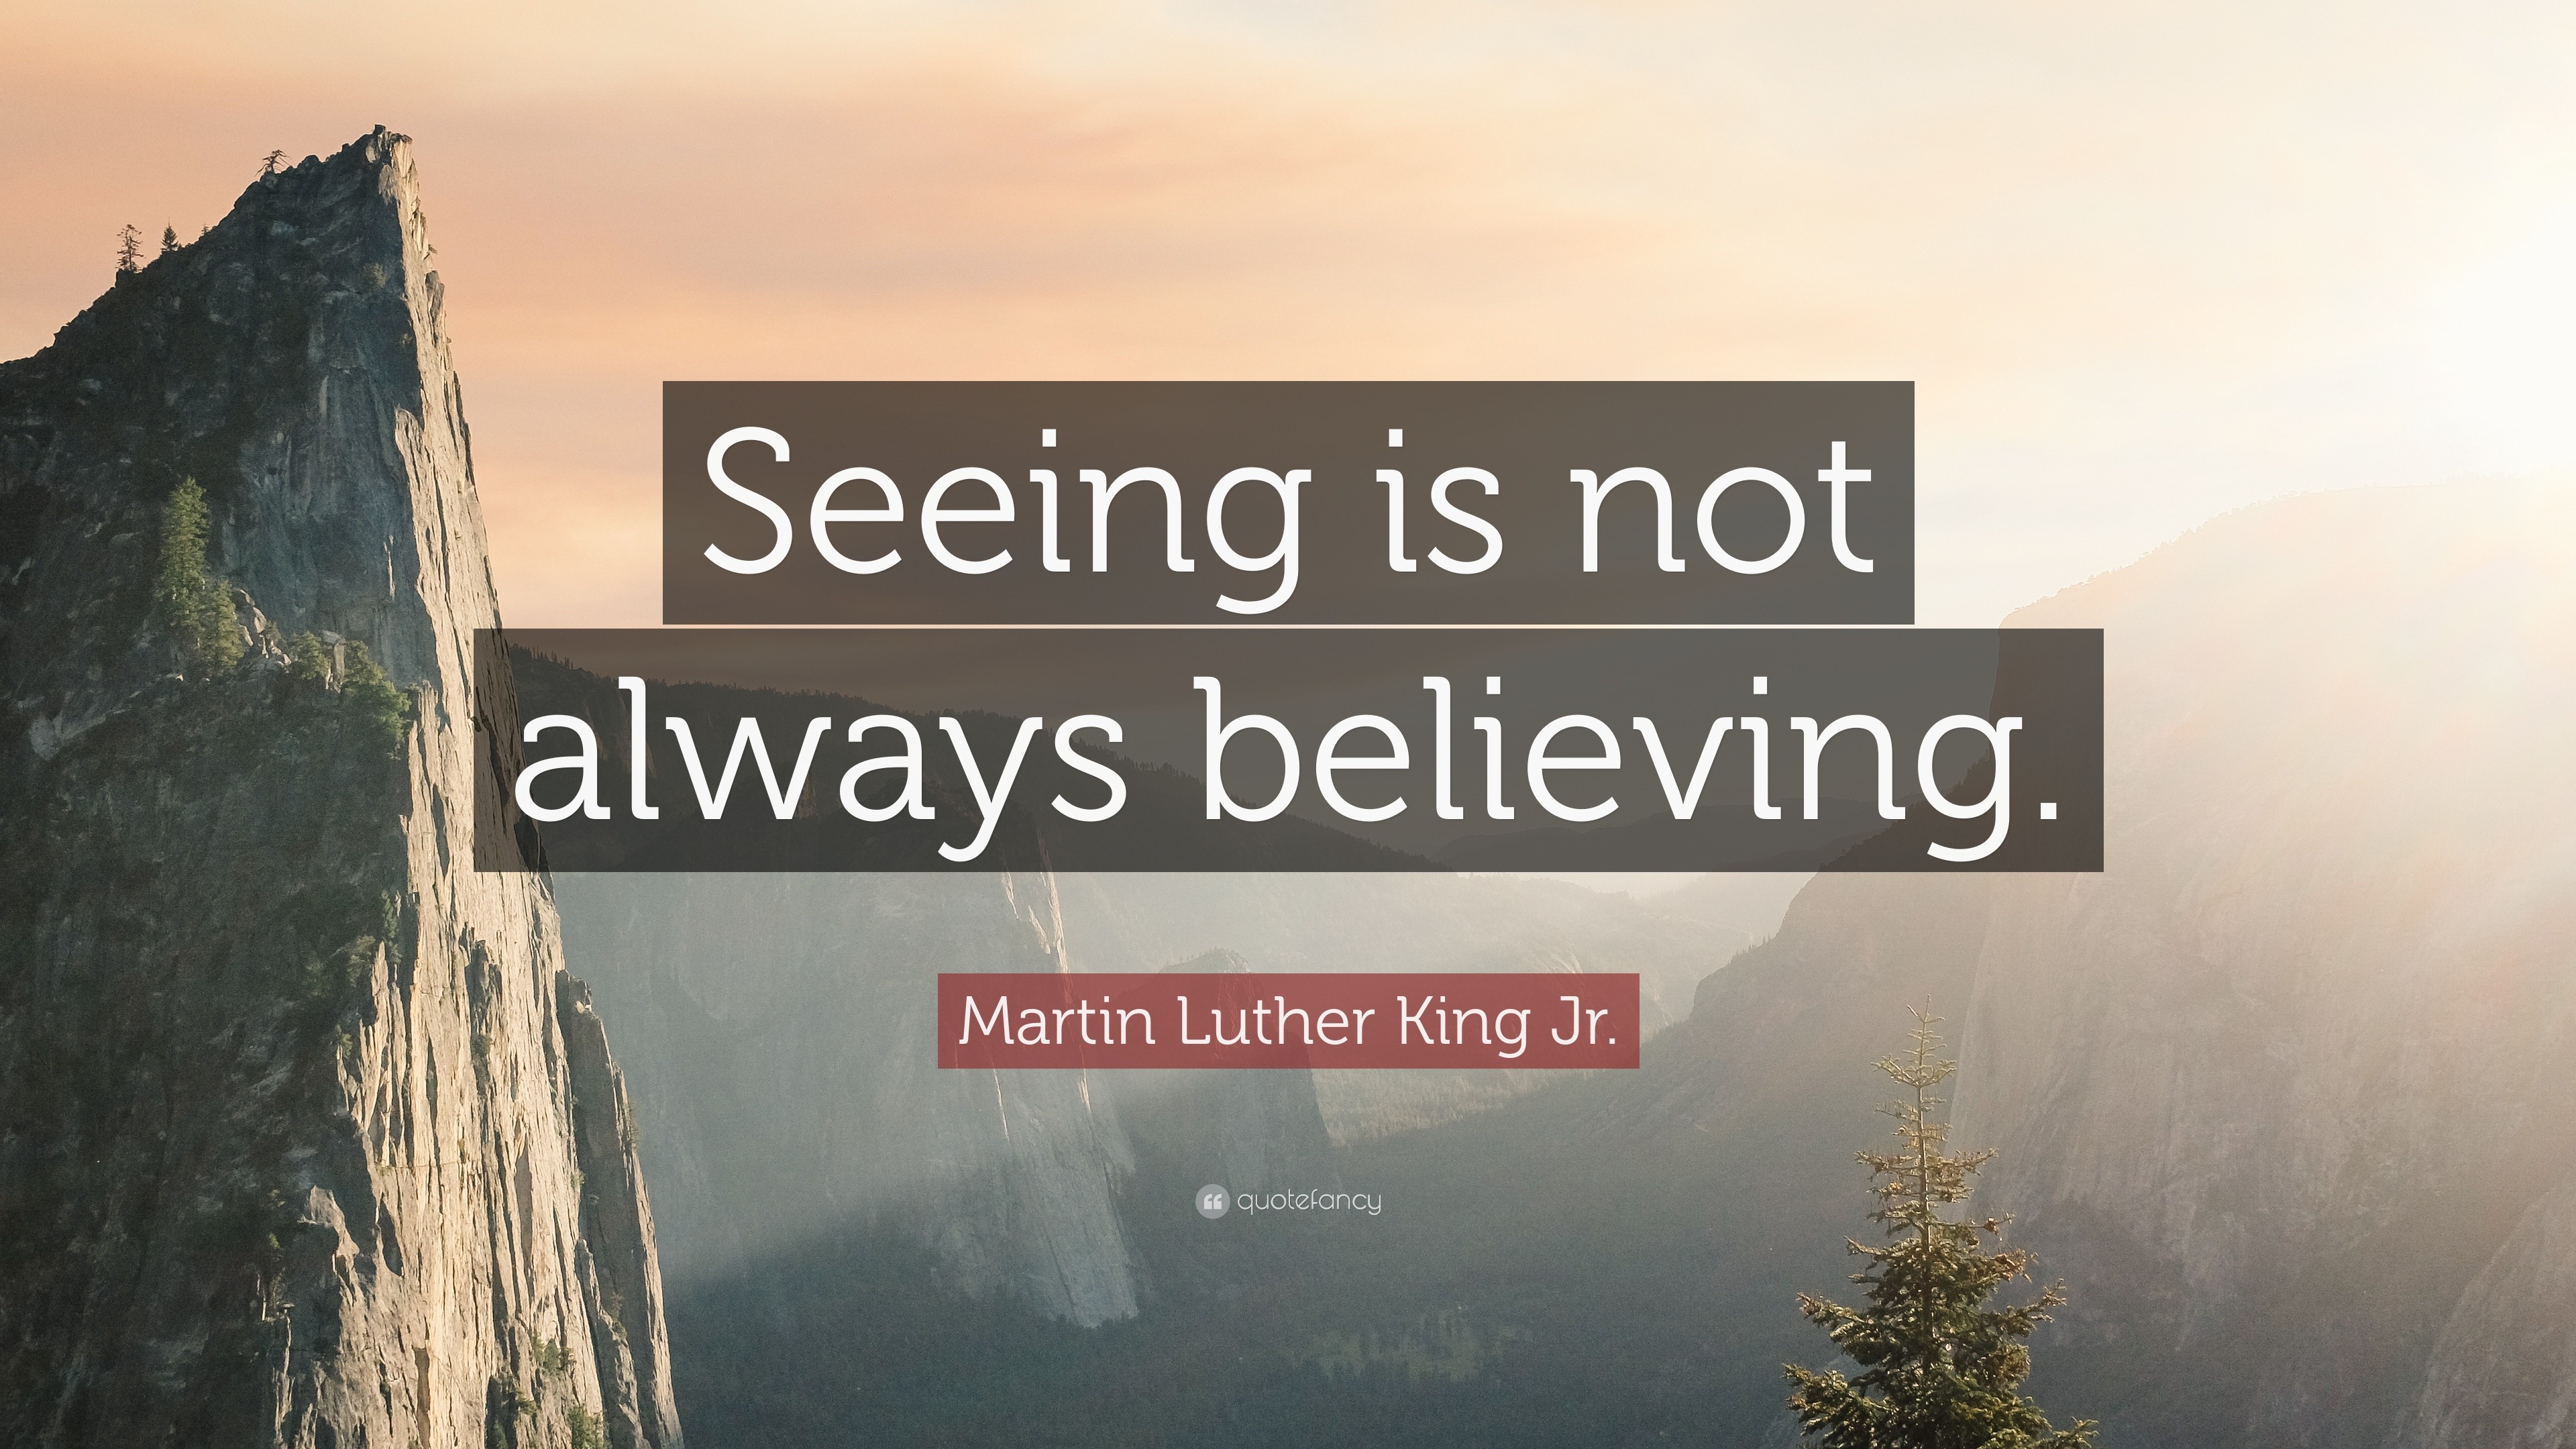 Martin Luther King Jr. Quote: “Seeing is not always believing.”